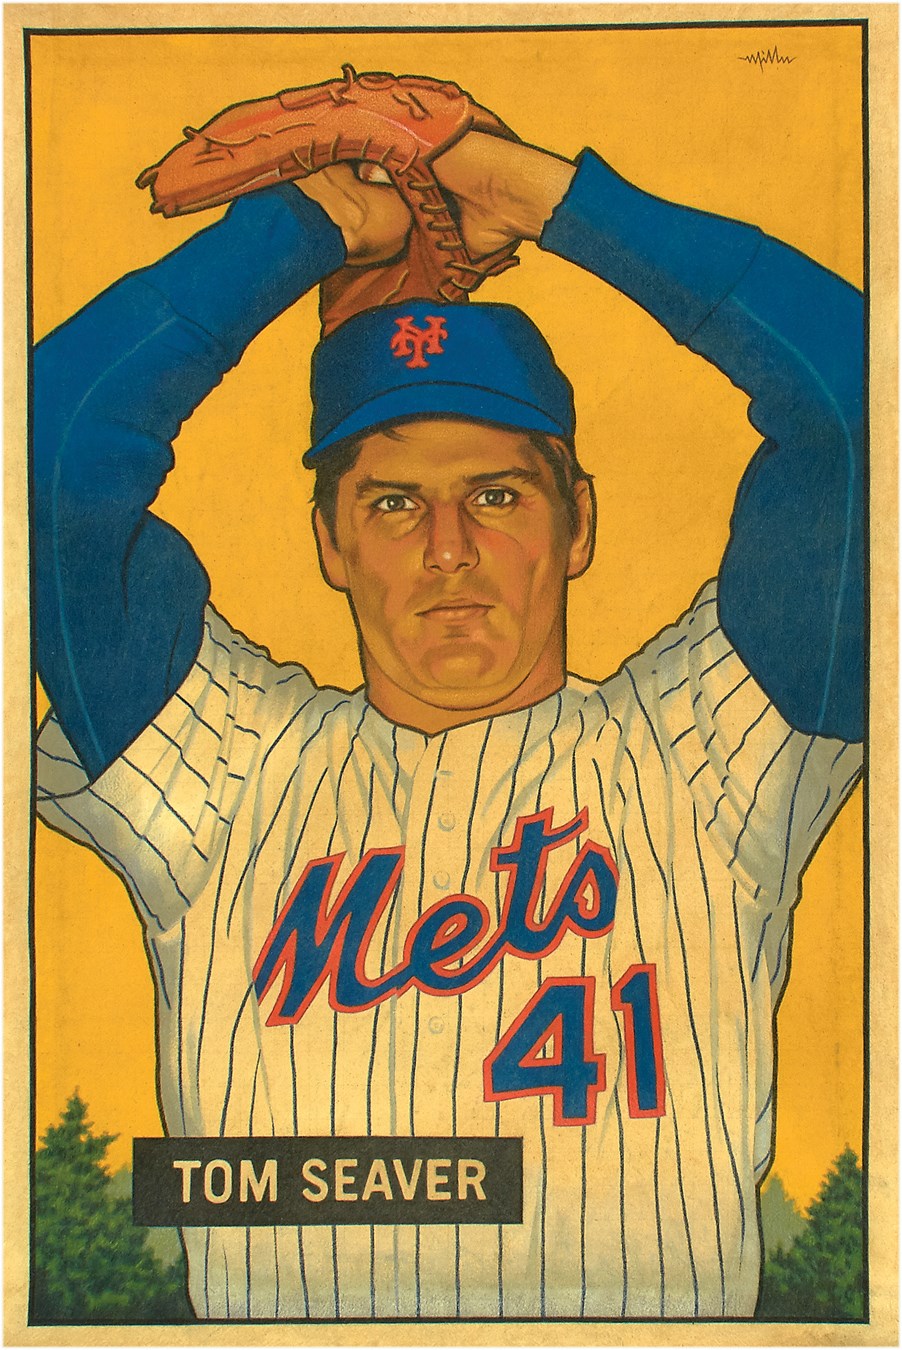 - “A Card That Never Was: TOM SEAVER (1951 Bowman)”